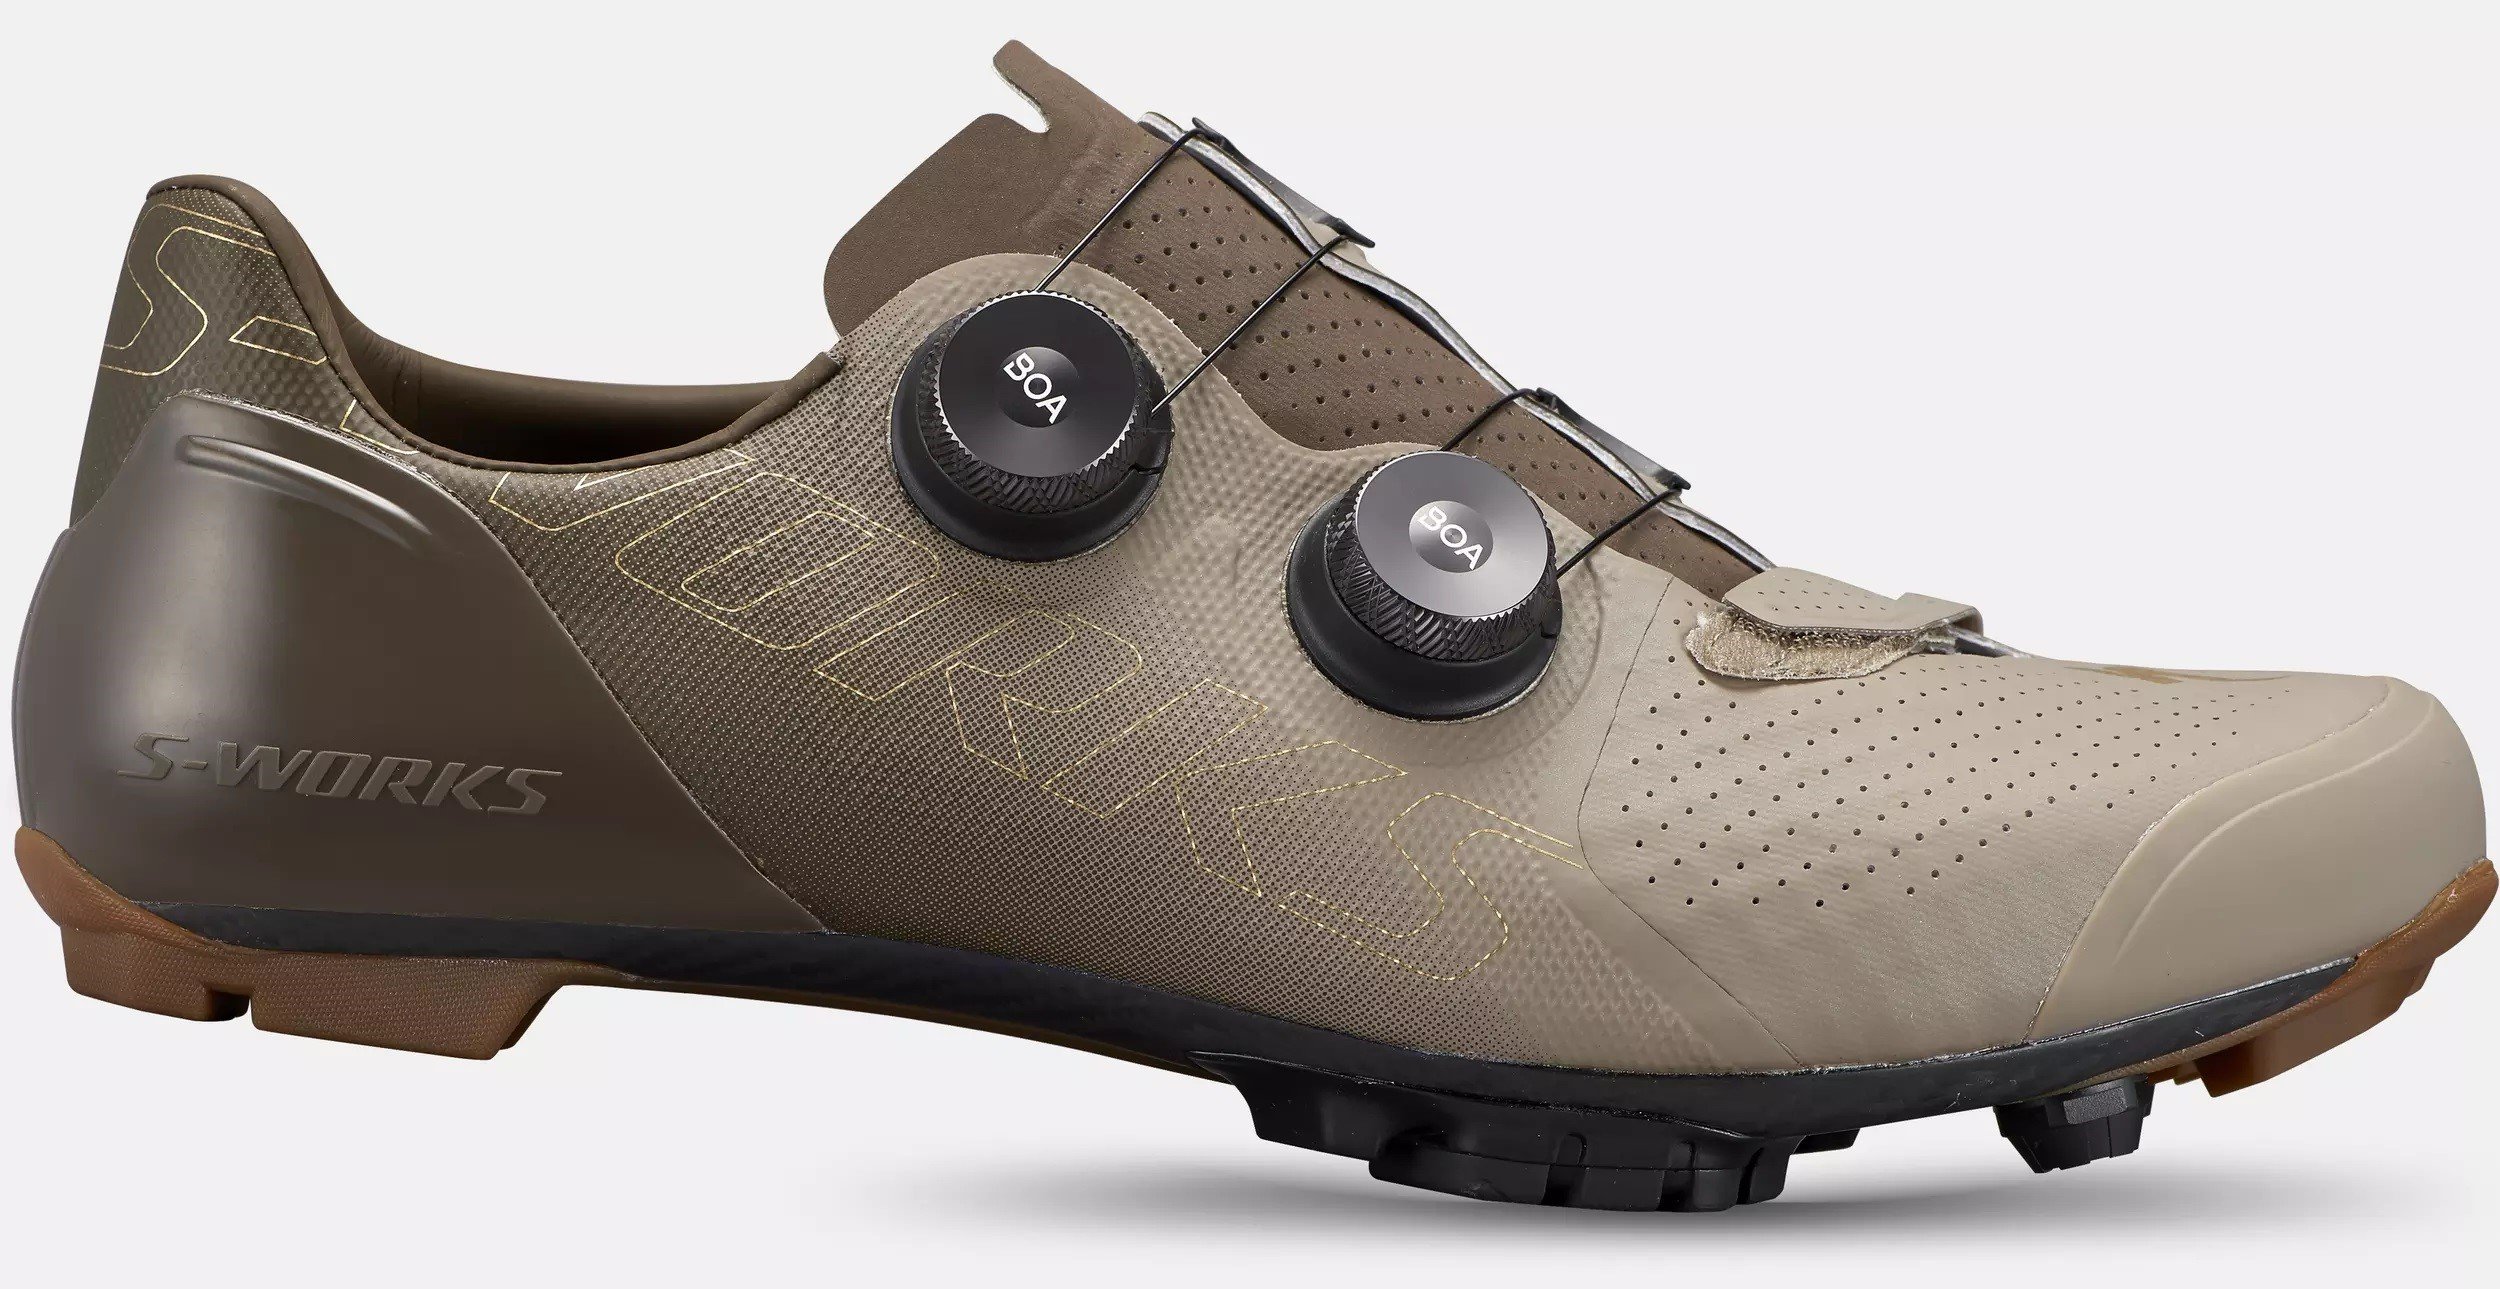 Specialized S-Works Recon MTB Shoe